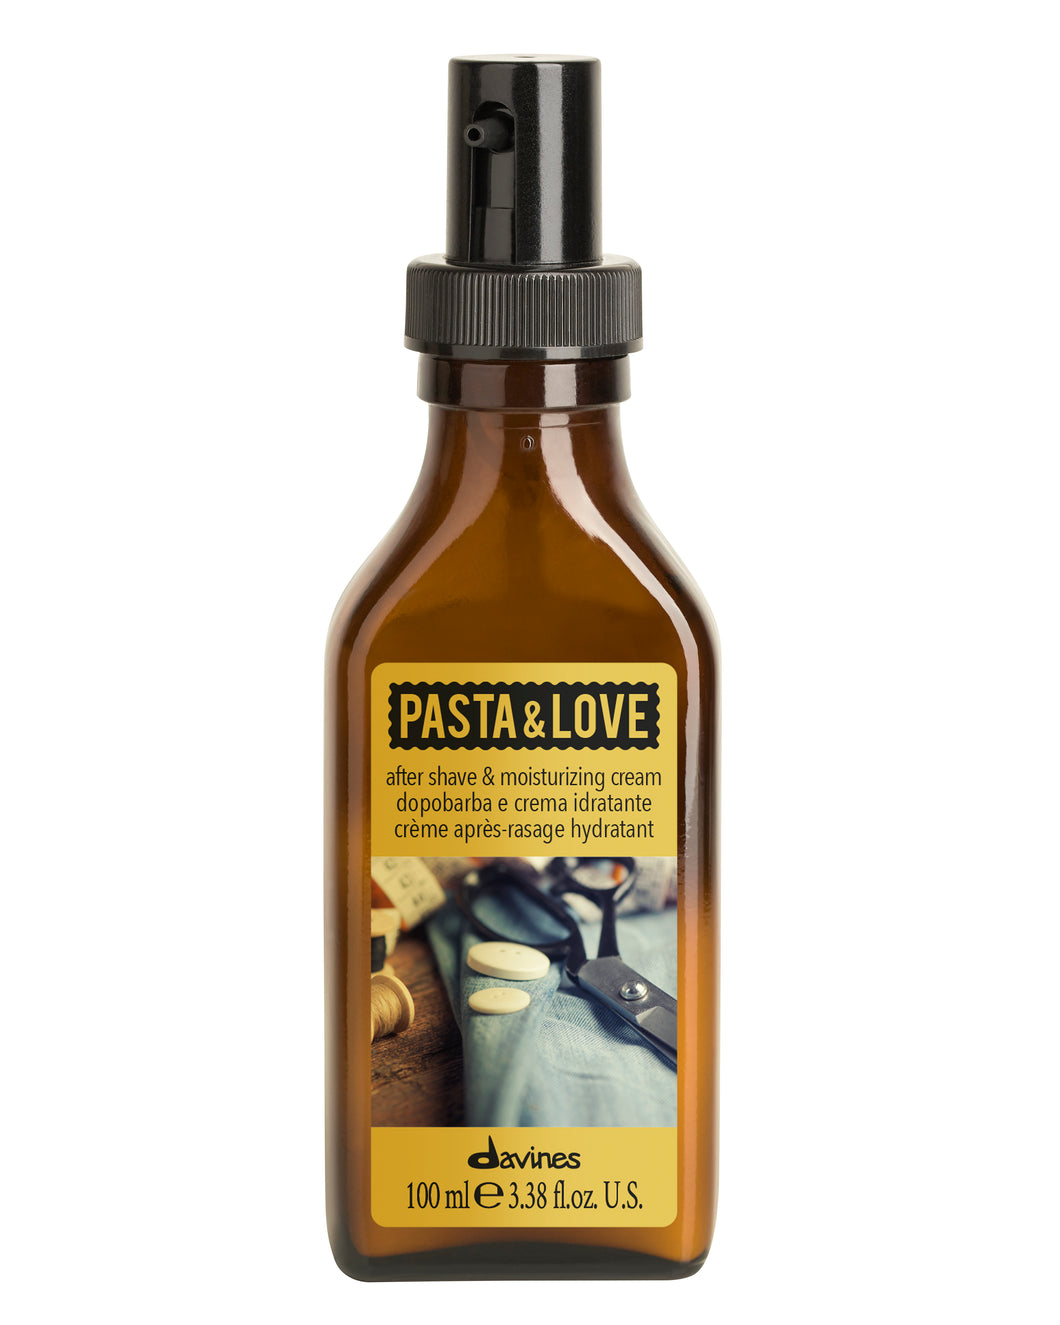 Pasta & Love After Shave and Moisturizing Cream